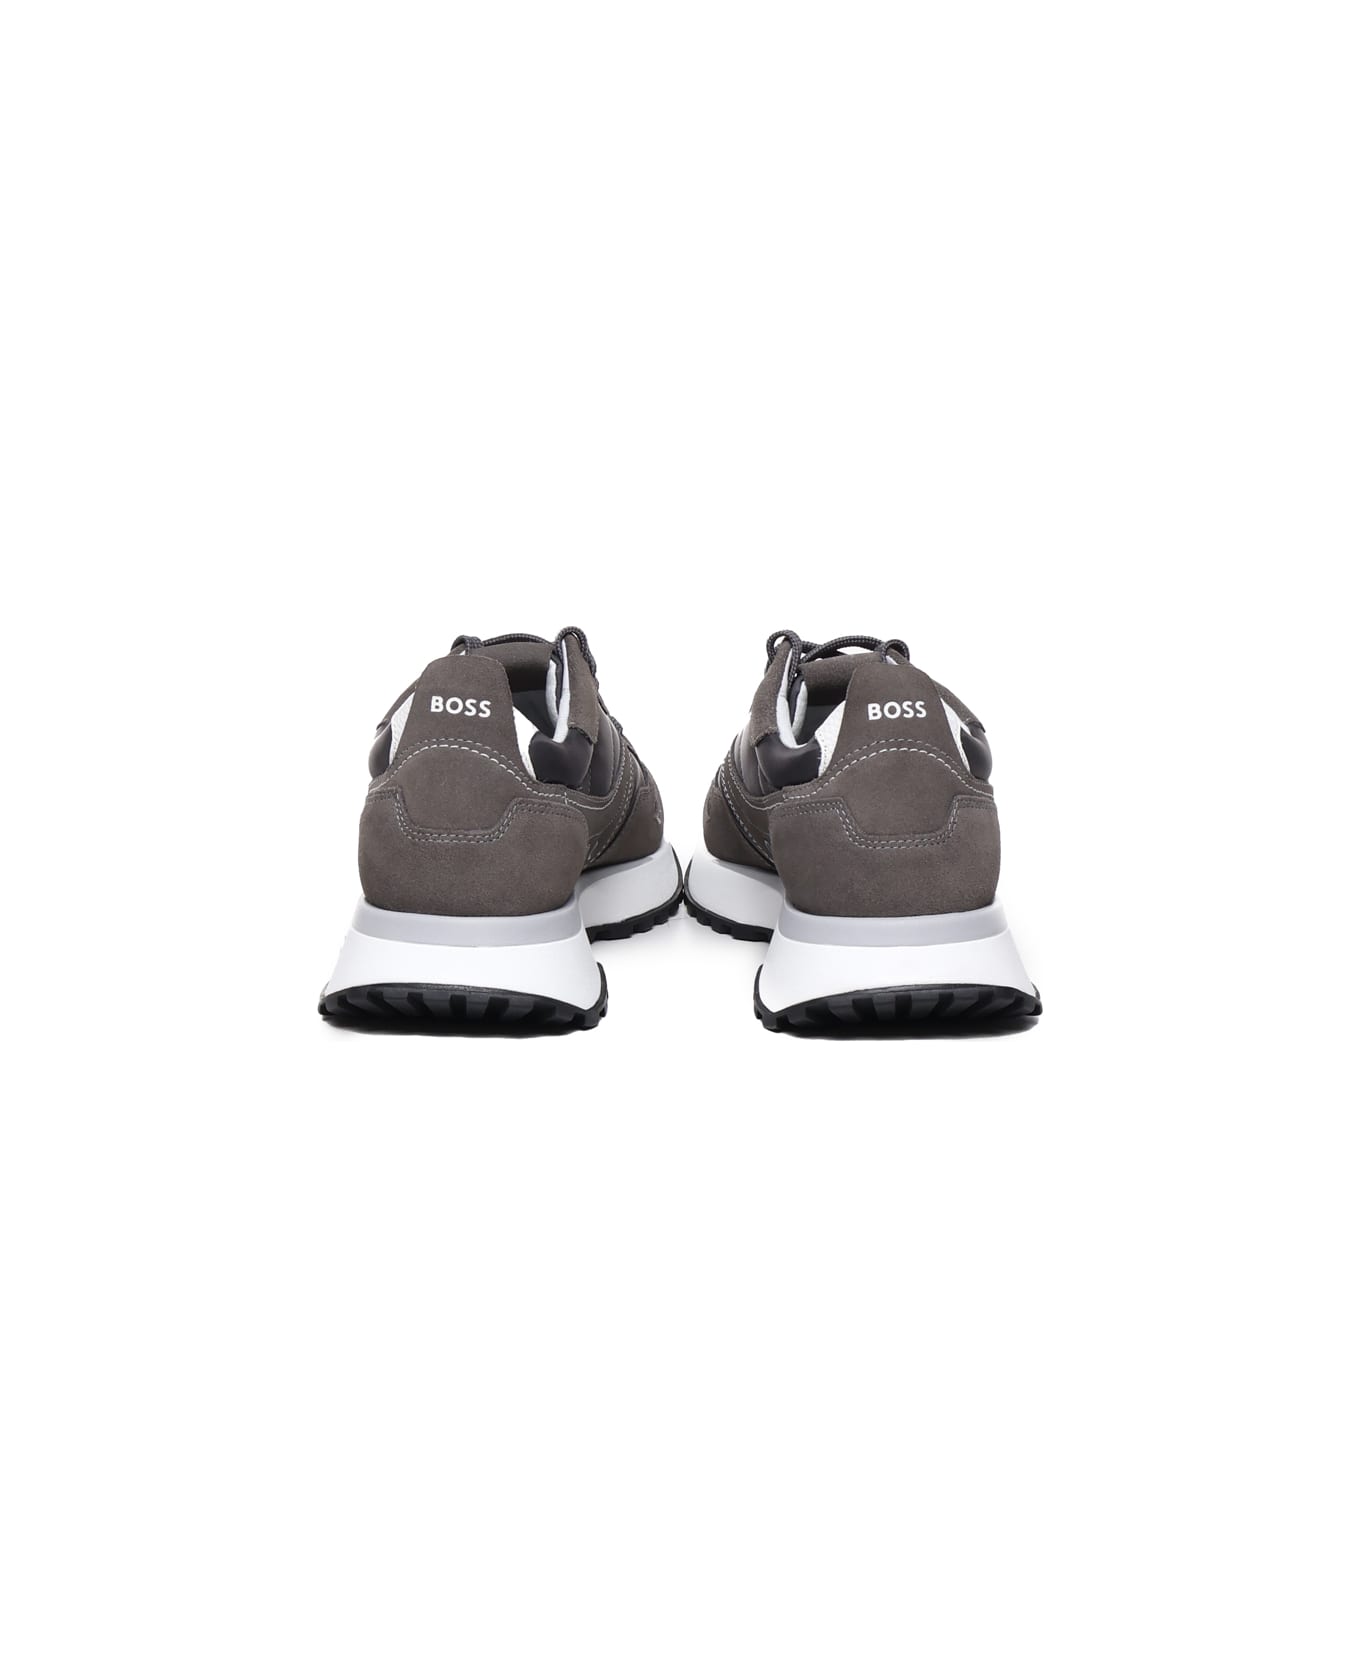 Hugo Boss Mixed Materials Sneakers With Suede And Branded Trim - Grey